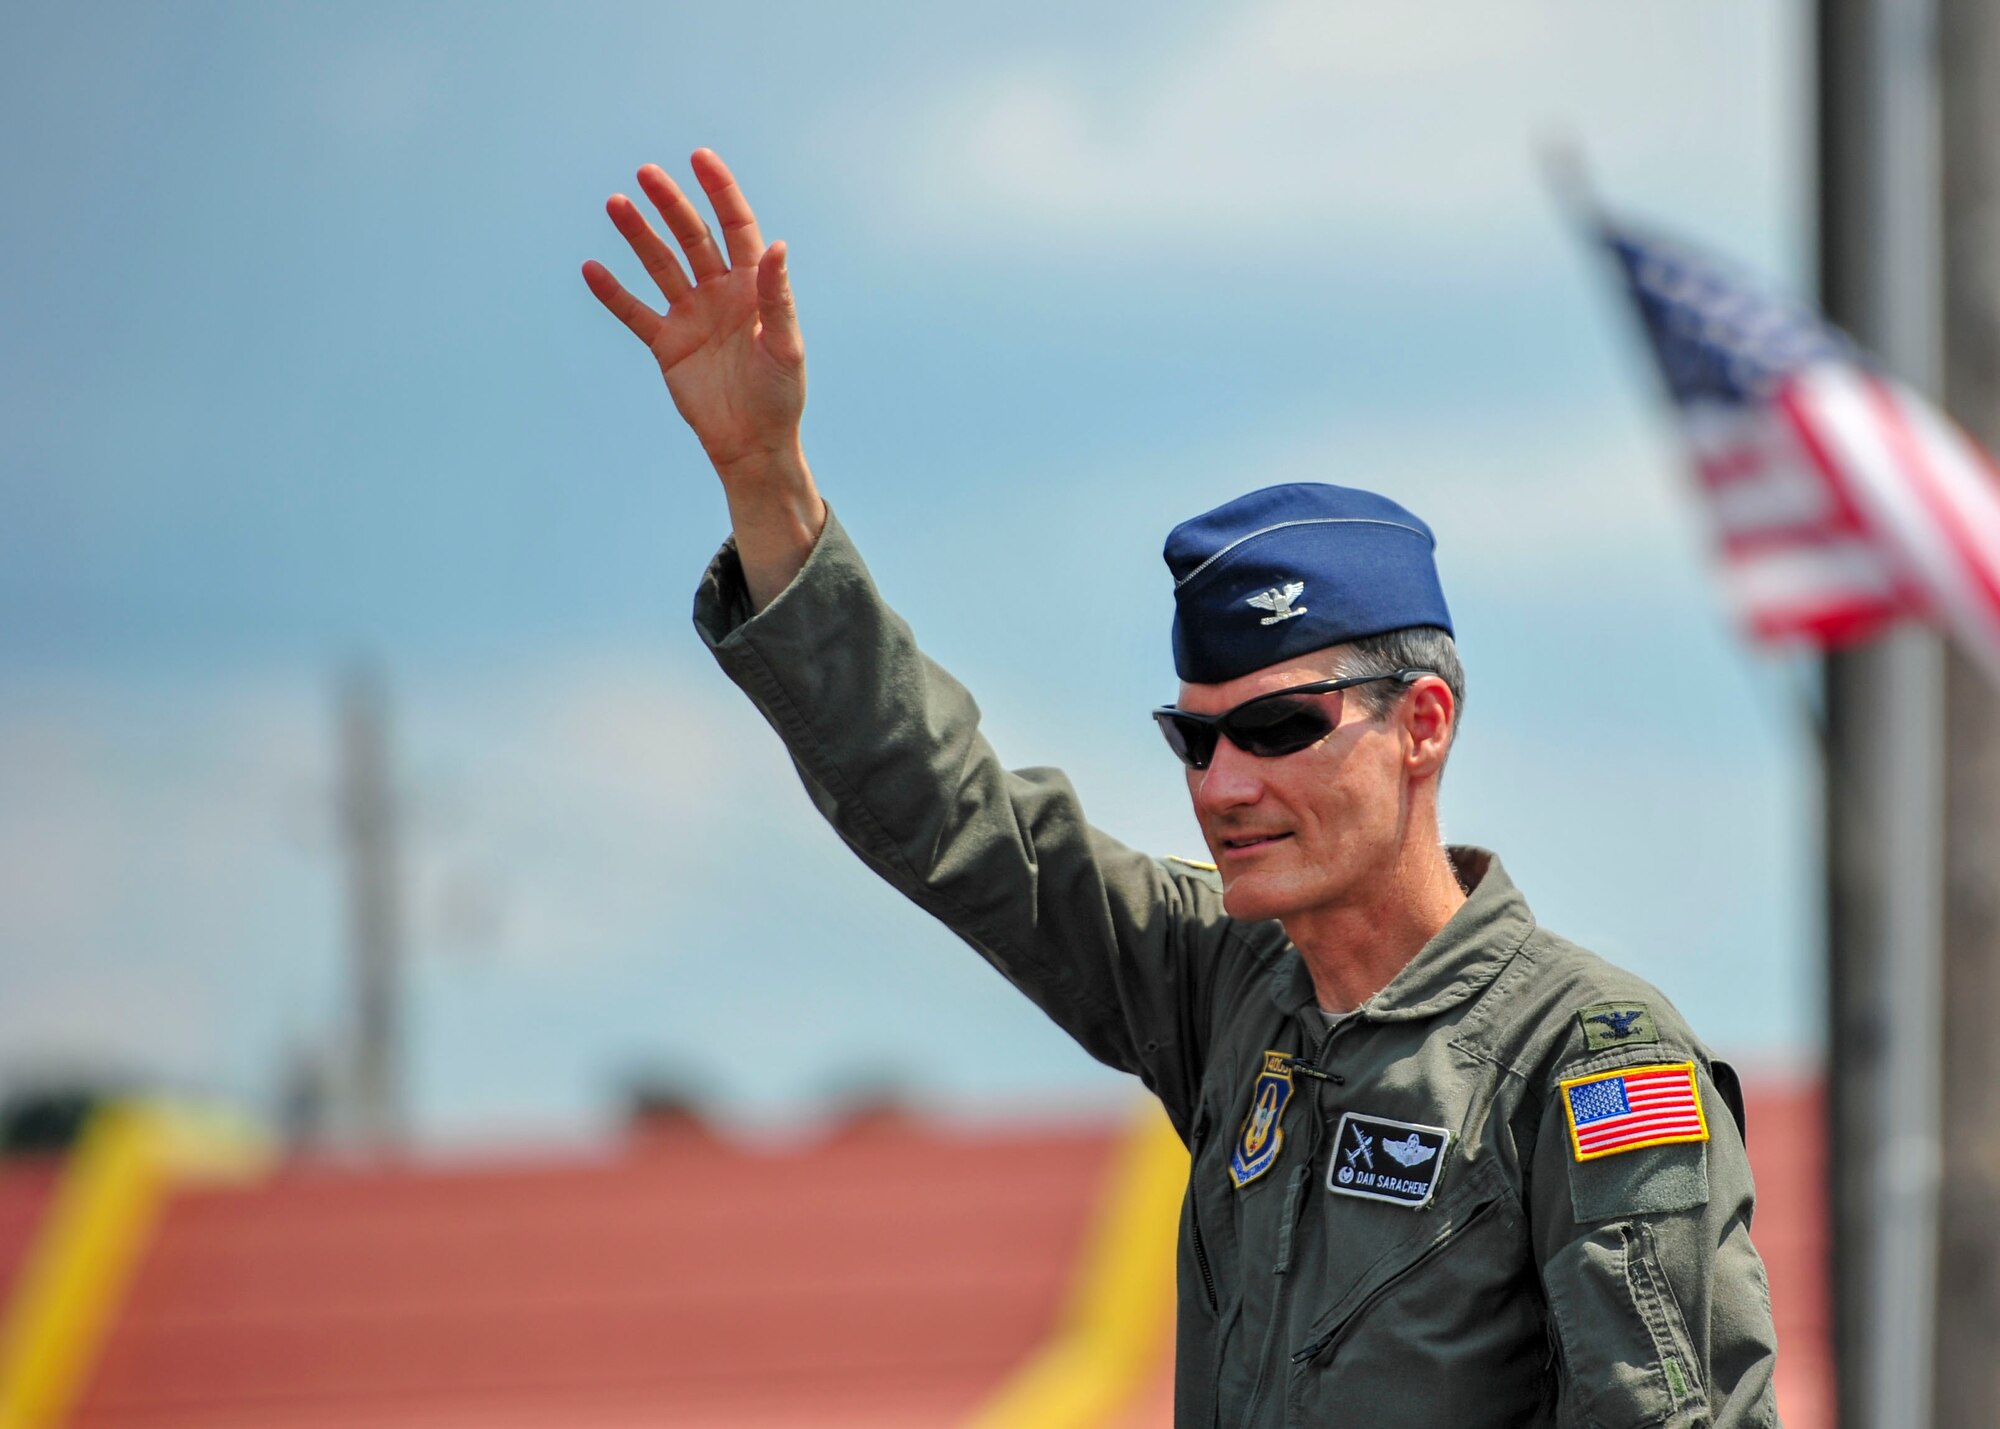 Col. Dan Sarachene, 910th Airlift Wing commander, waves to the crowd during a Fourth of July parade in Austintown, Ohio.